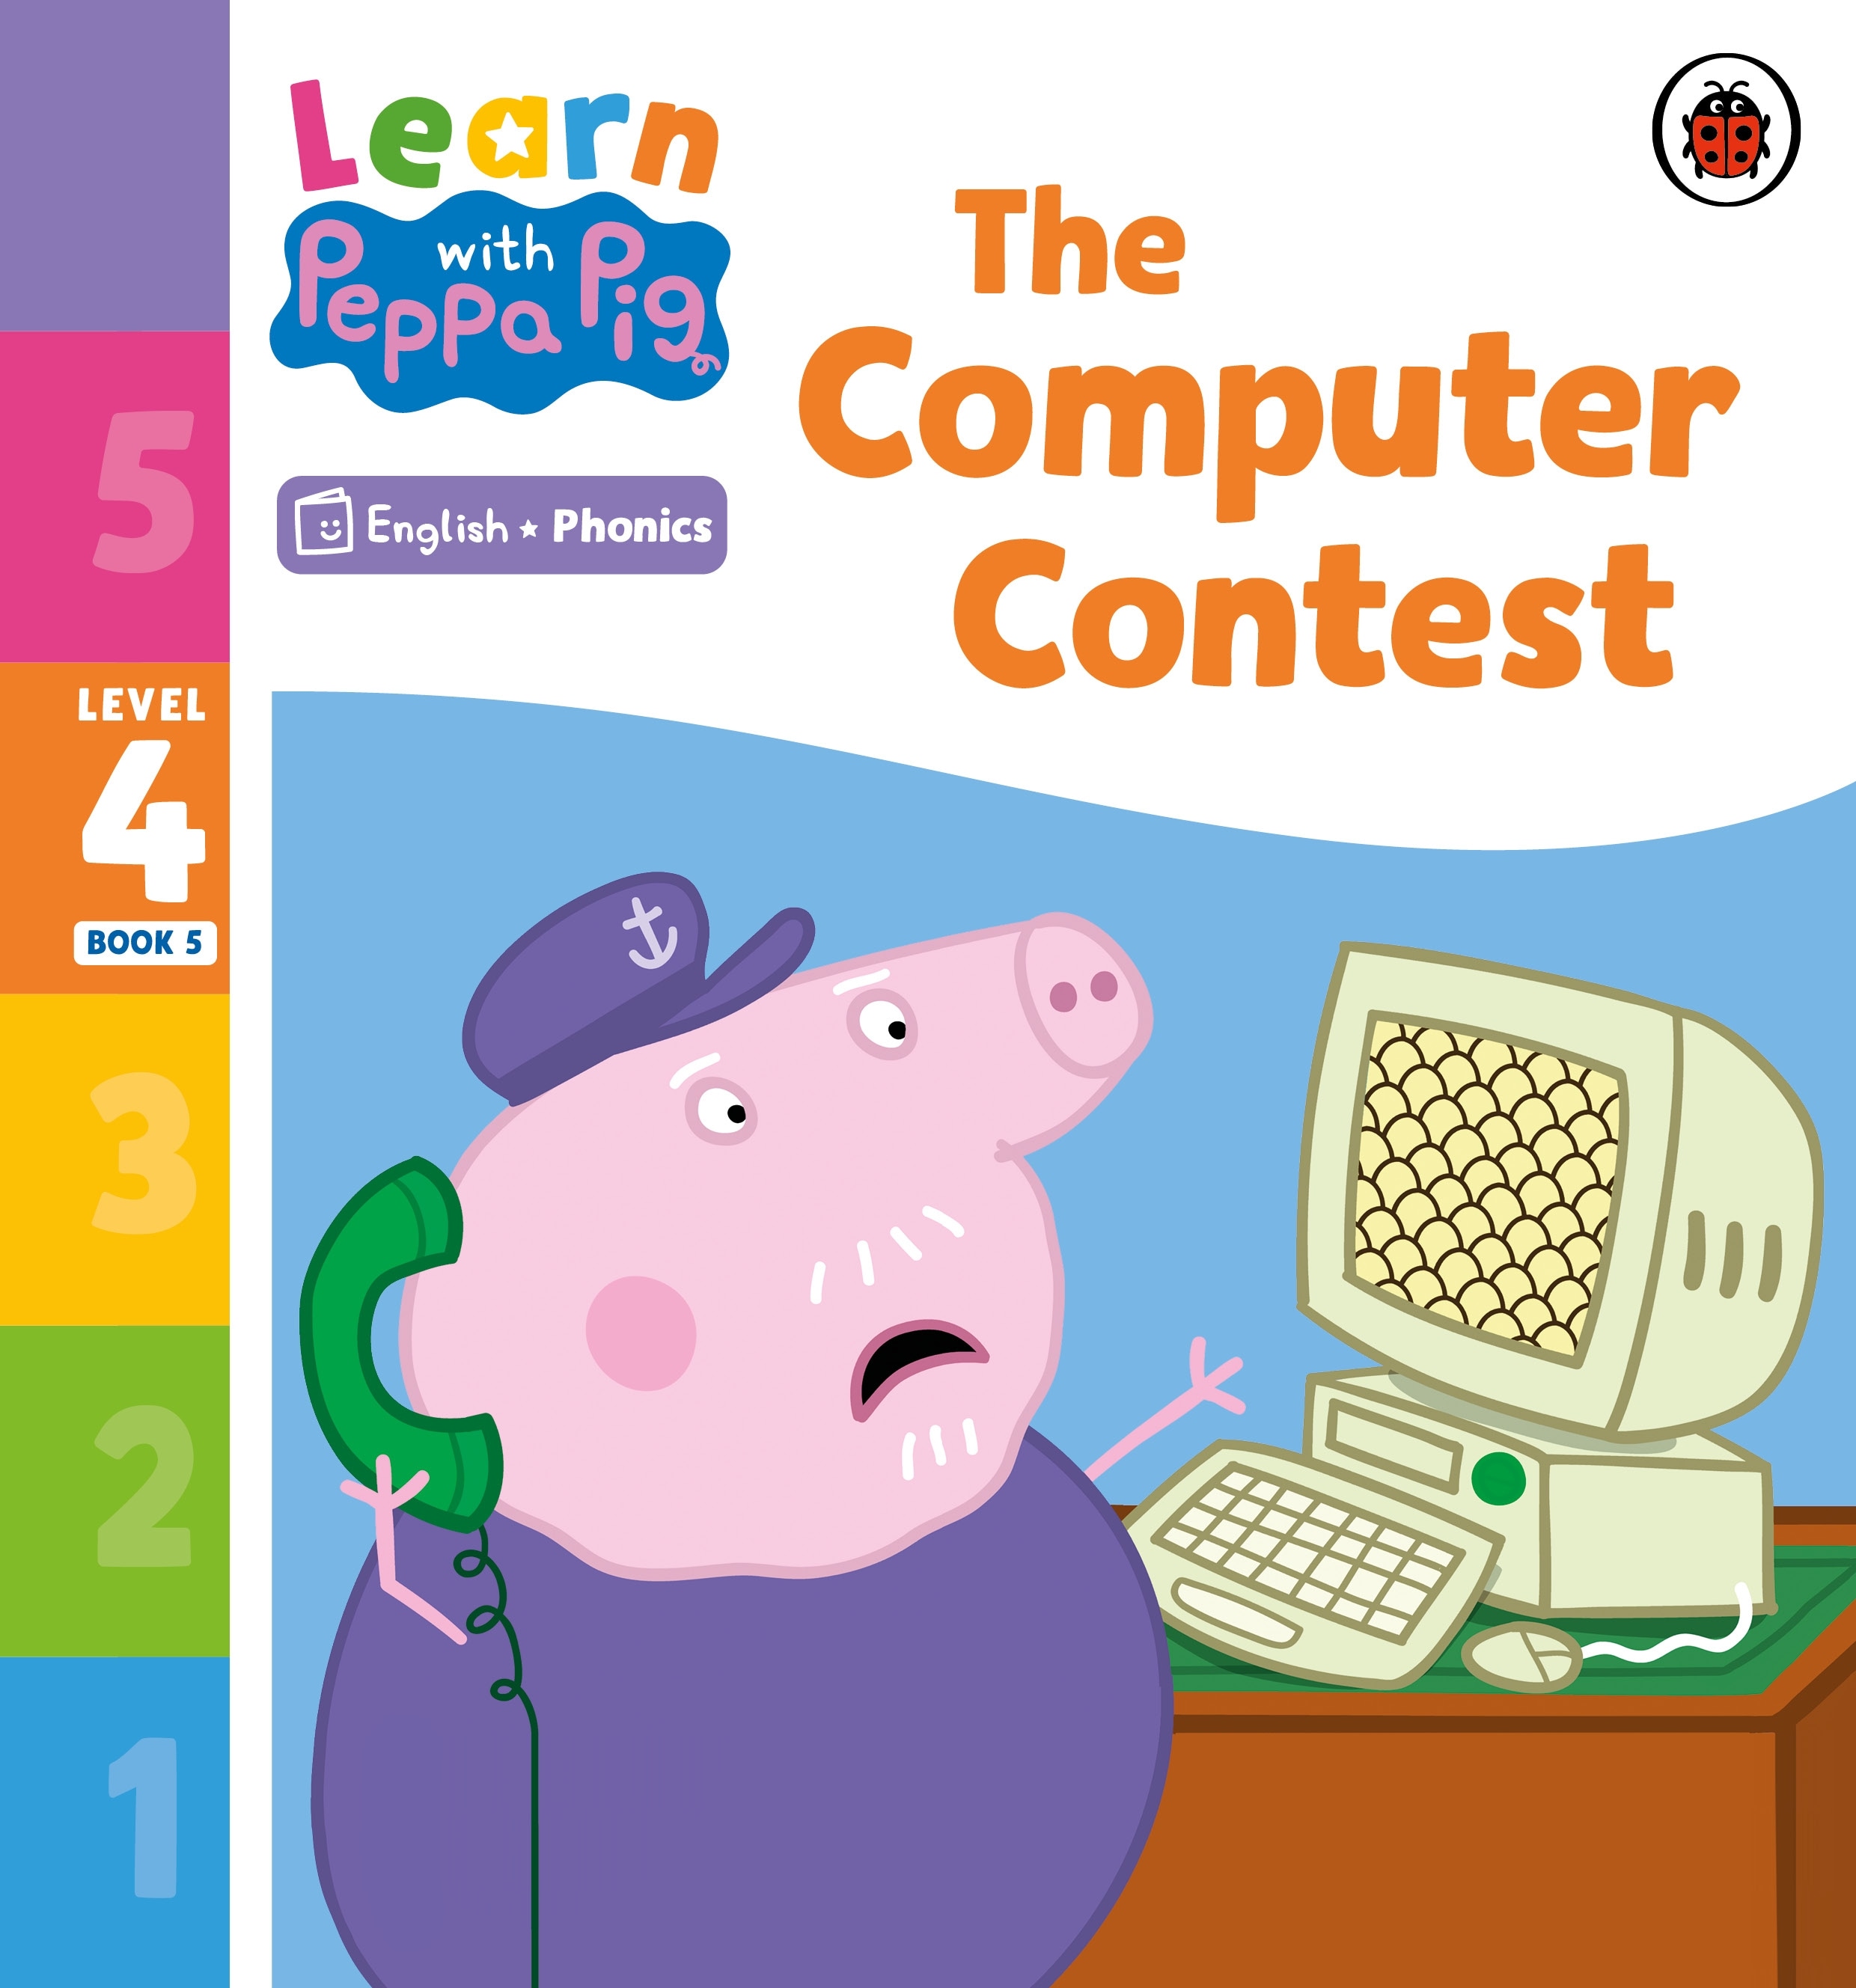 Learn with Peppa Phonics Level 4 Book 5 — The Computer Contest (Phonics Reader)